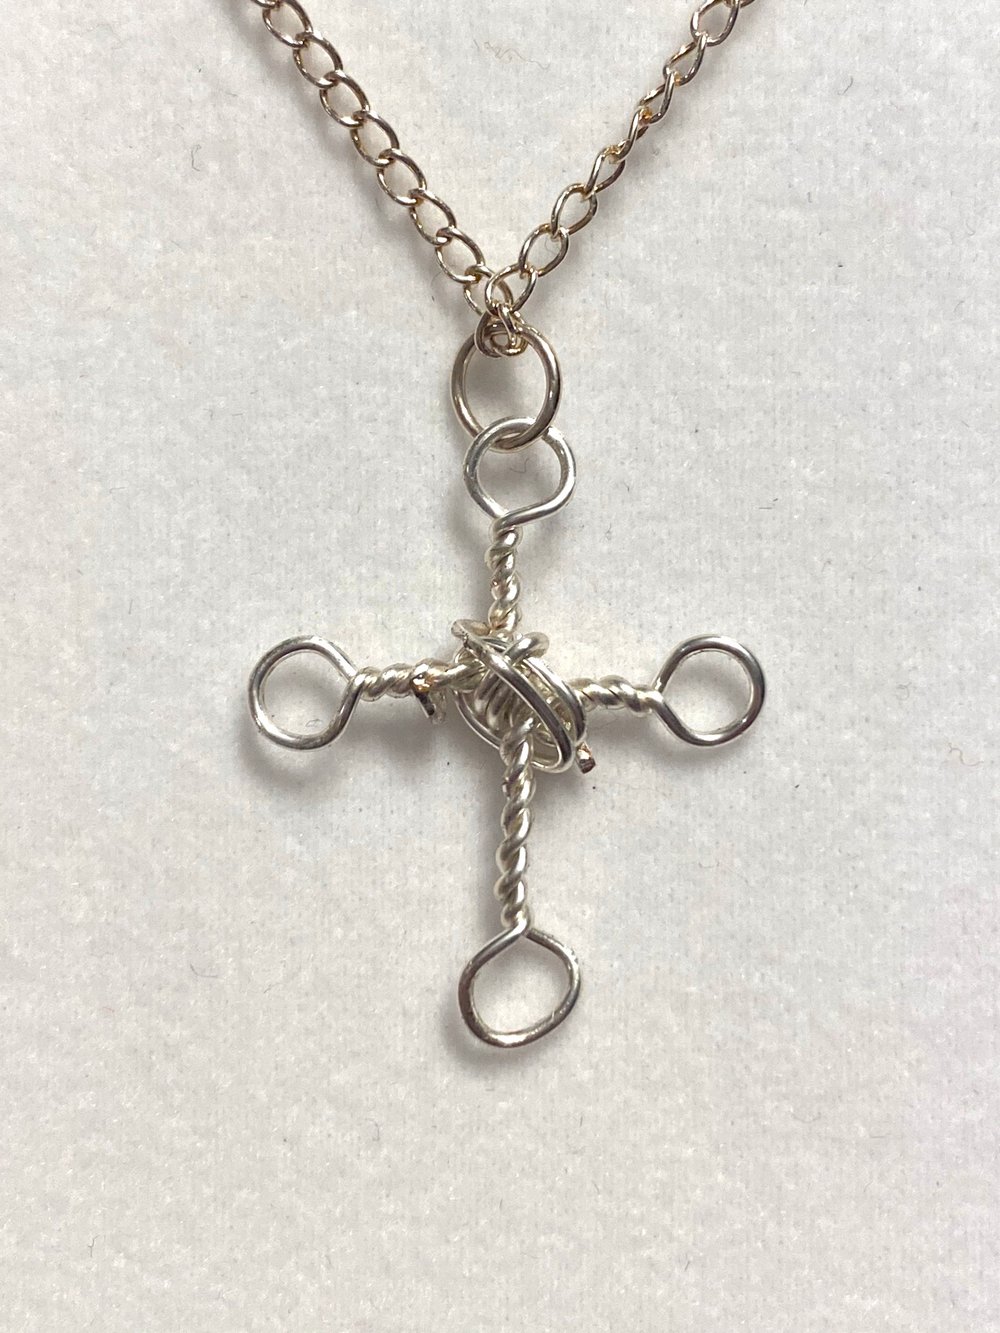 Silver Cross and Chain Necklace